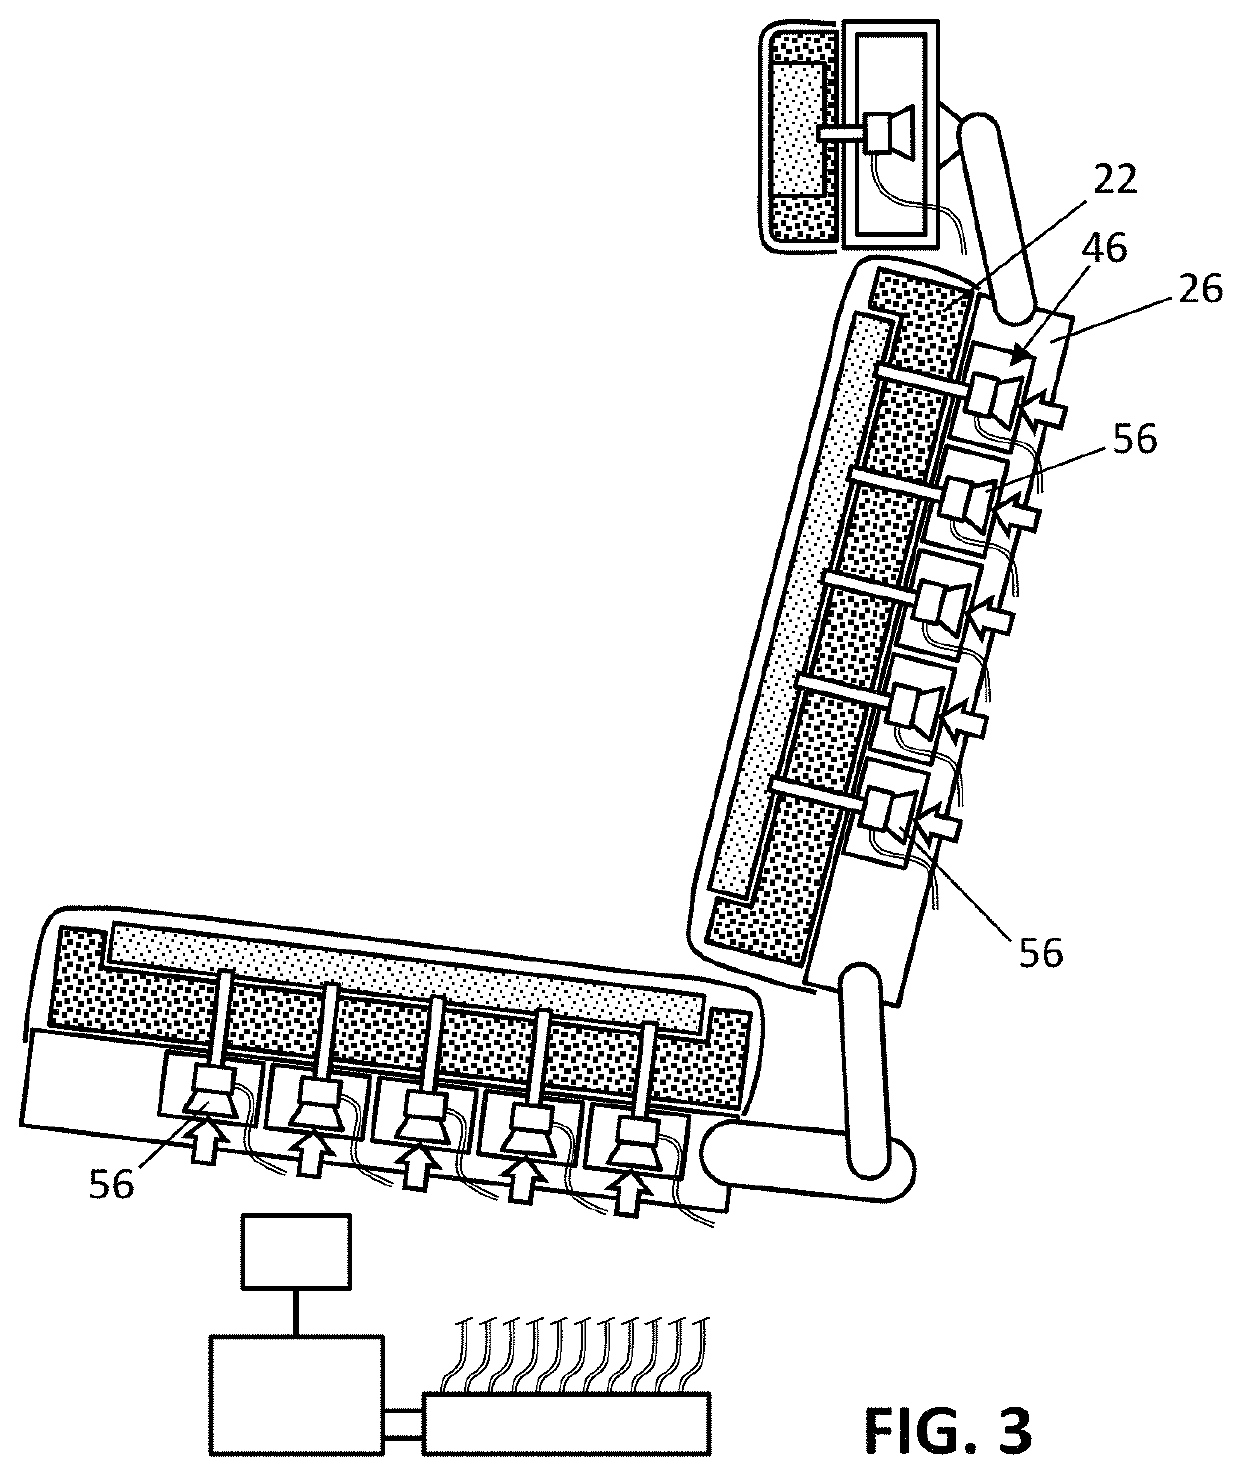 Seat assembly with ventilation system utilizing venturi effect to multiply air flow